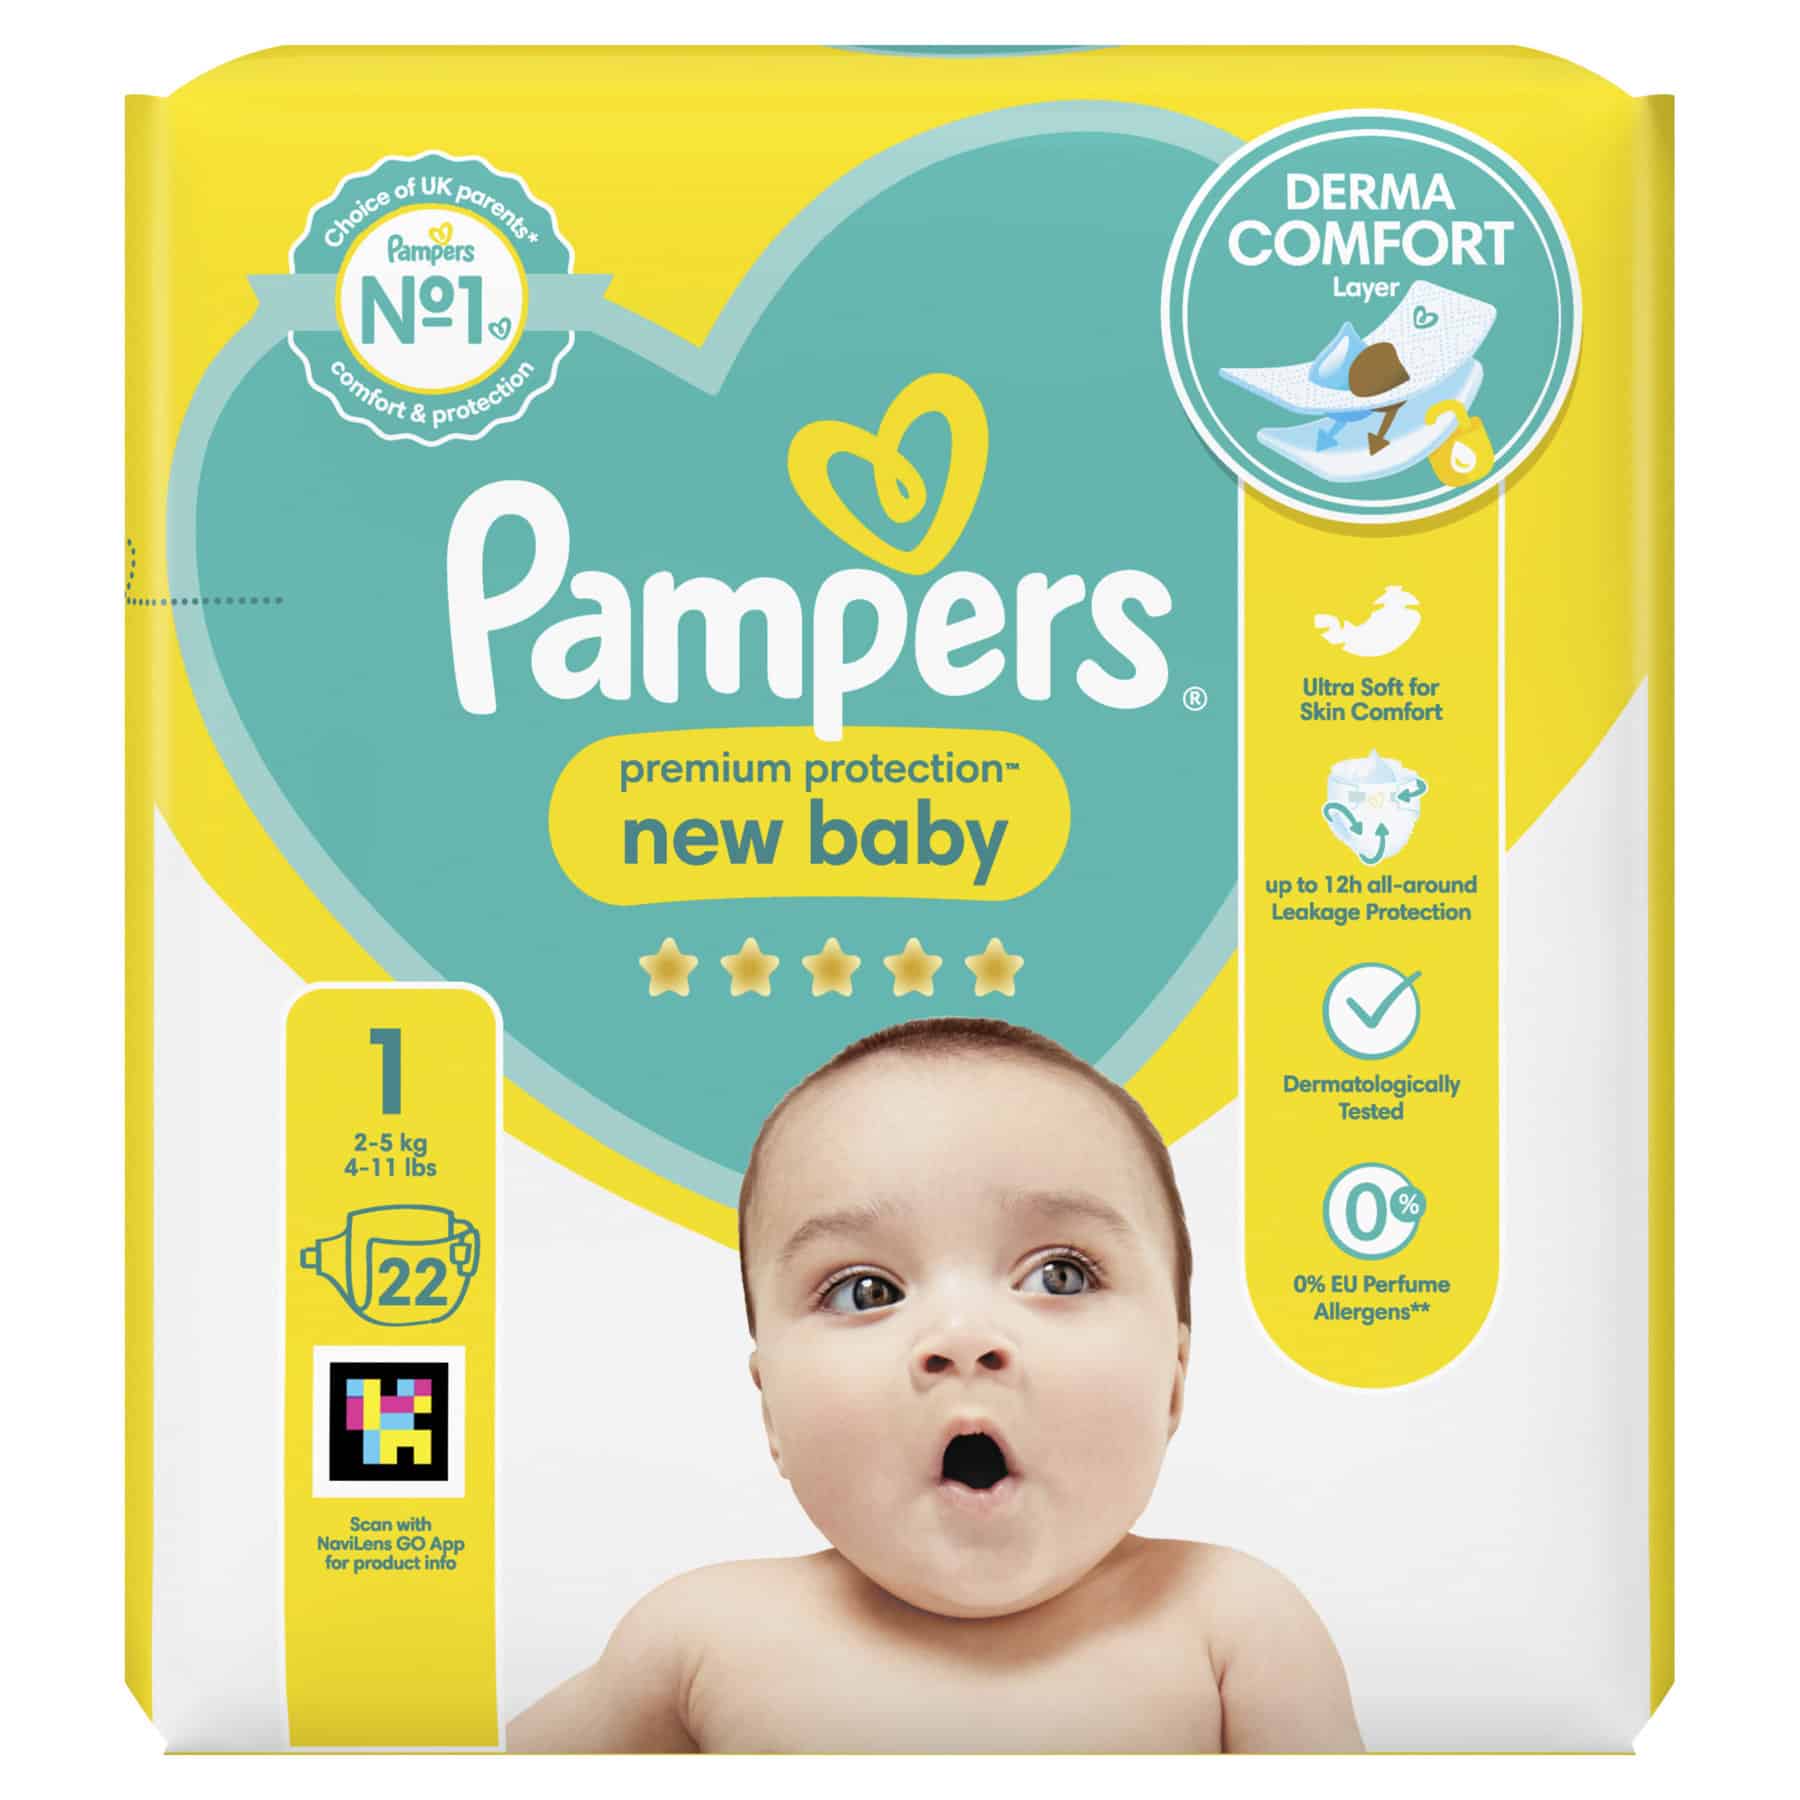 pampers cena selgros